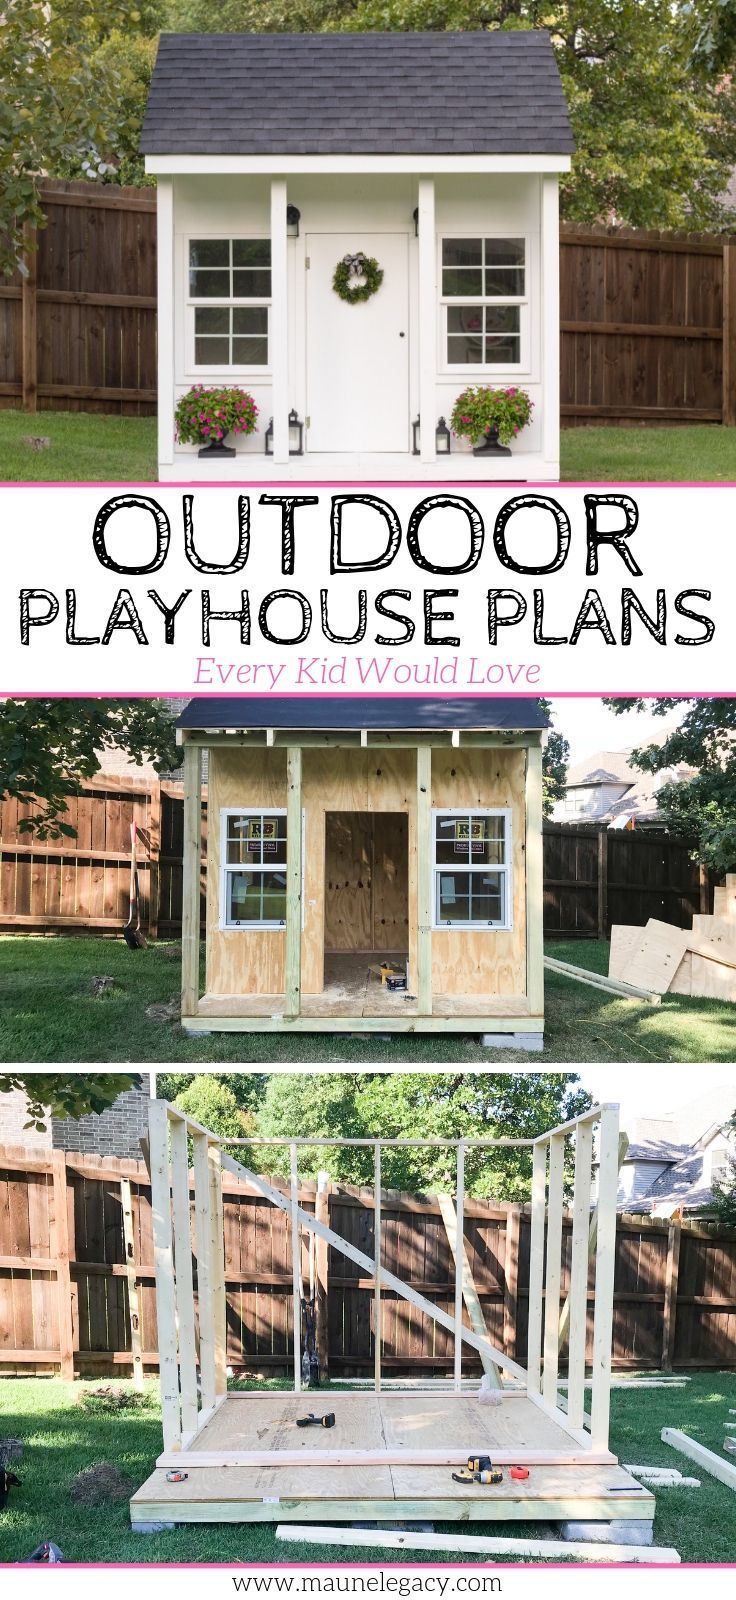 Outdoor Playhouse Plans | Home Design & Lifestyle | Jennifer Maune - Outdoor Playhouse Plans | Home Design & Lifestyle | Jennifer Maune -   18 diy Kids house ideas